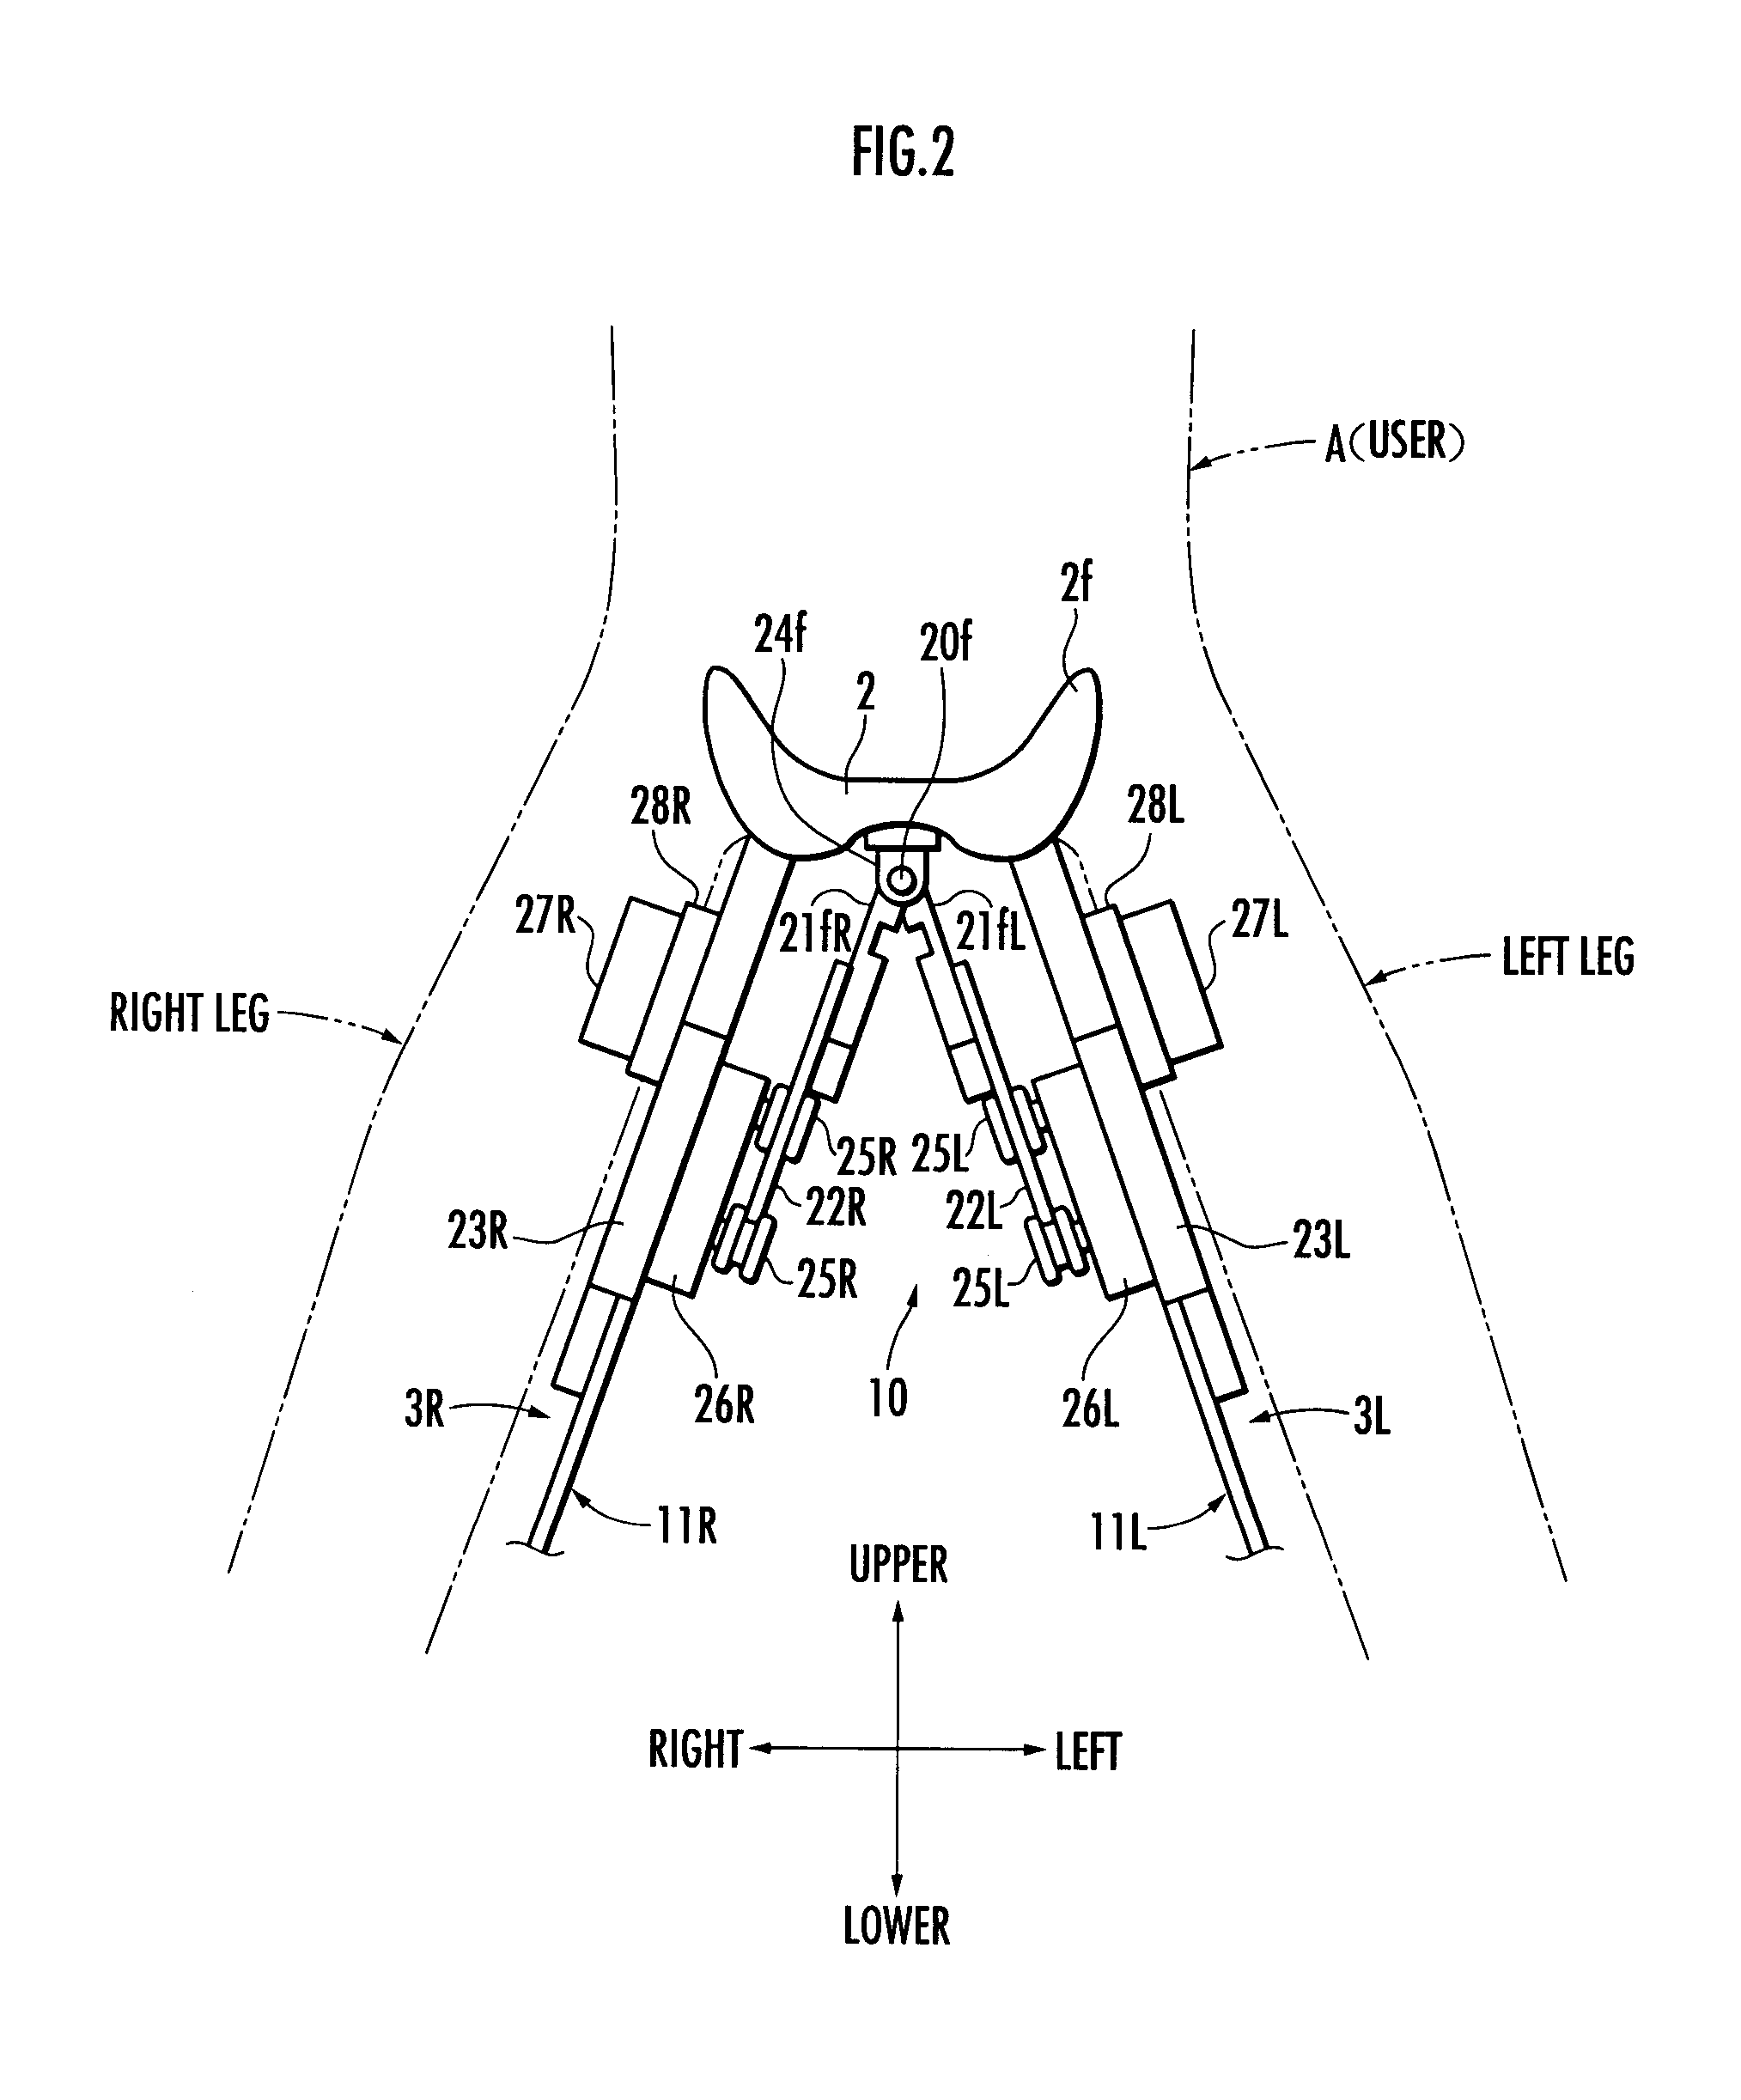 Controller for walking assistance device